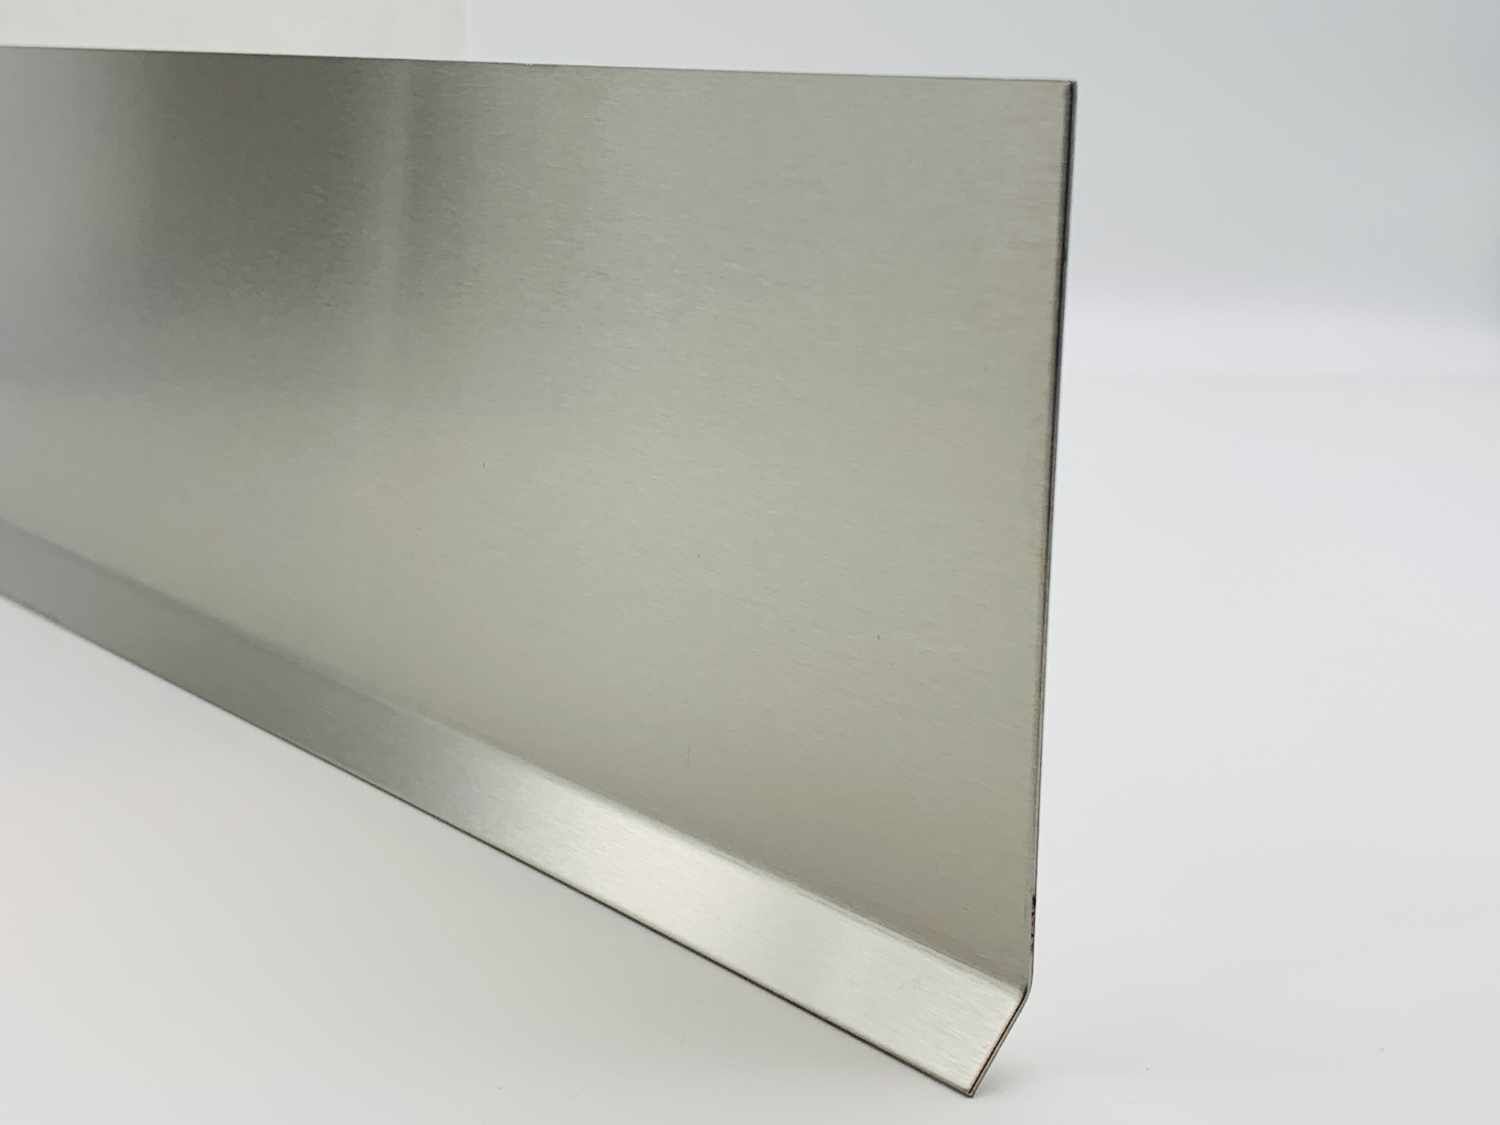 The Importance of a Polished Finish in Stainless Steel